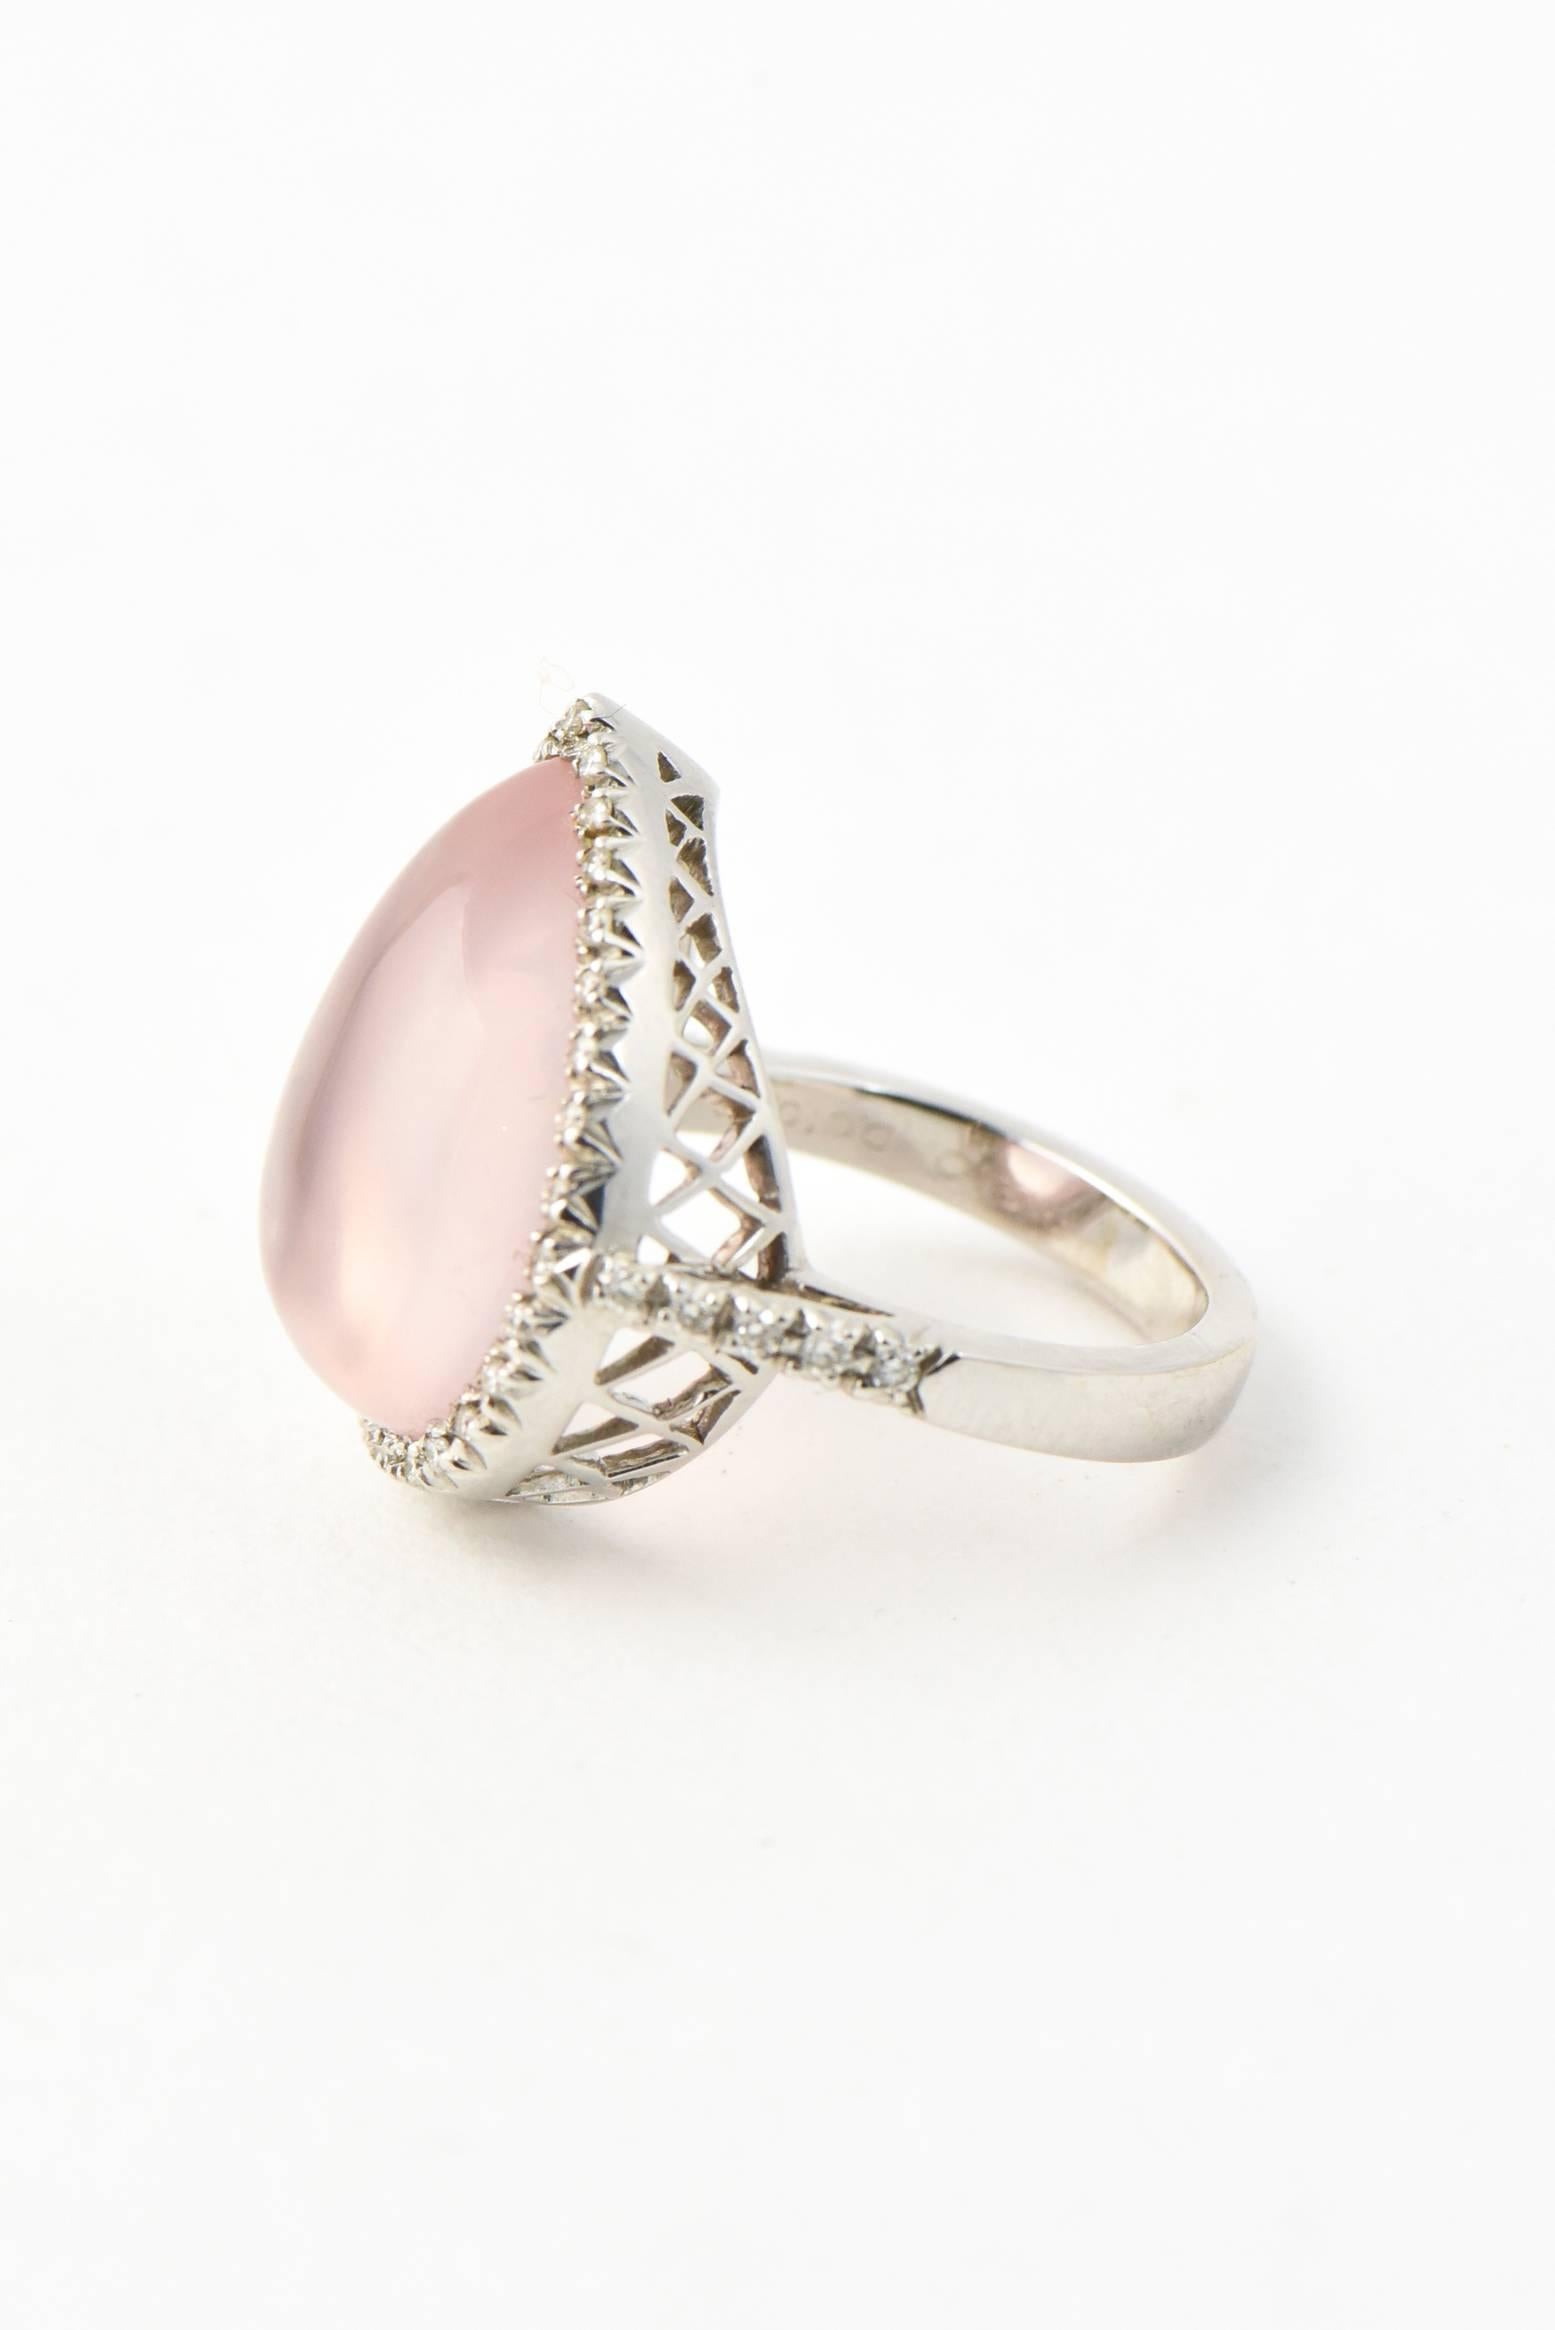 Favor Rose Quartz & Diamond Cocktail Ring crafted from 18K white gold, featuring a teardrop shape rose quartz cabochon set within a bezel of diamonds. 

 Marked 18K a Favero's logo Made in Italy

US size 5 - it can be sized